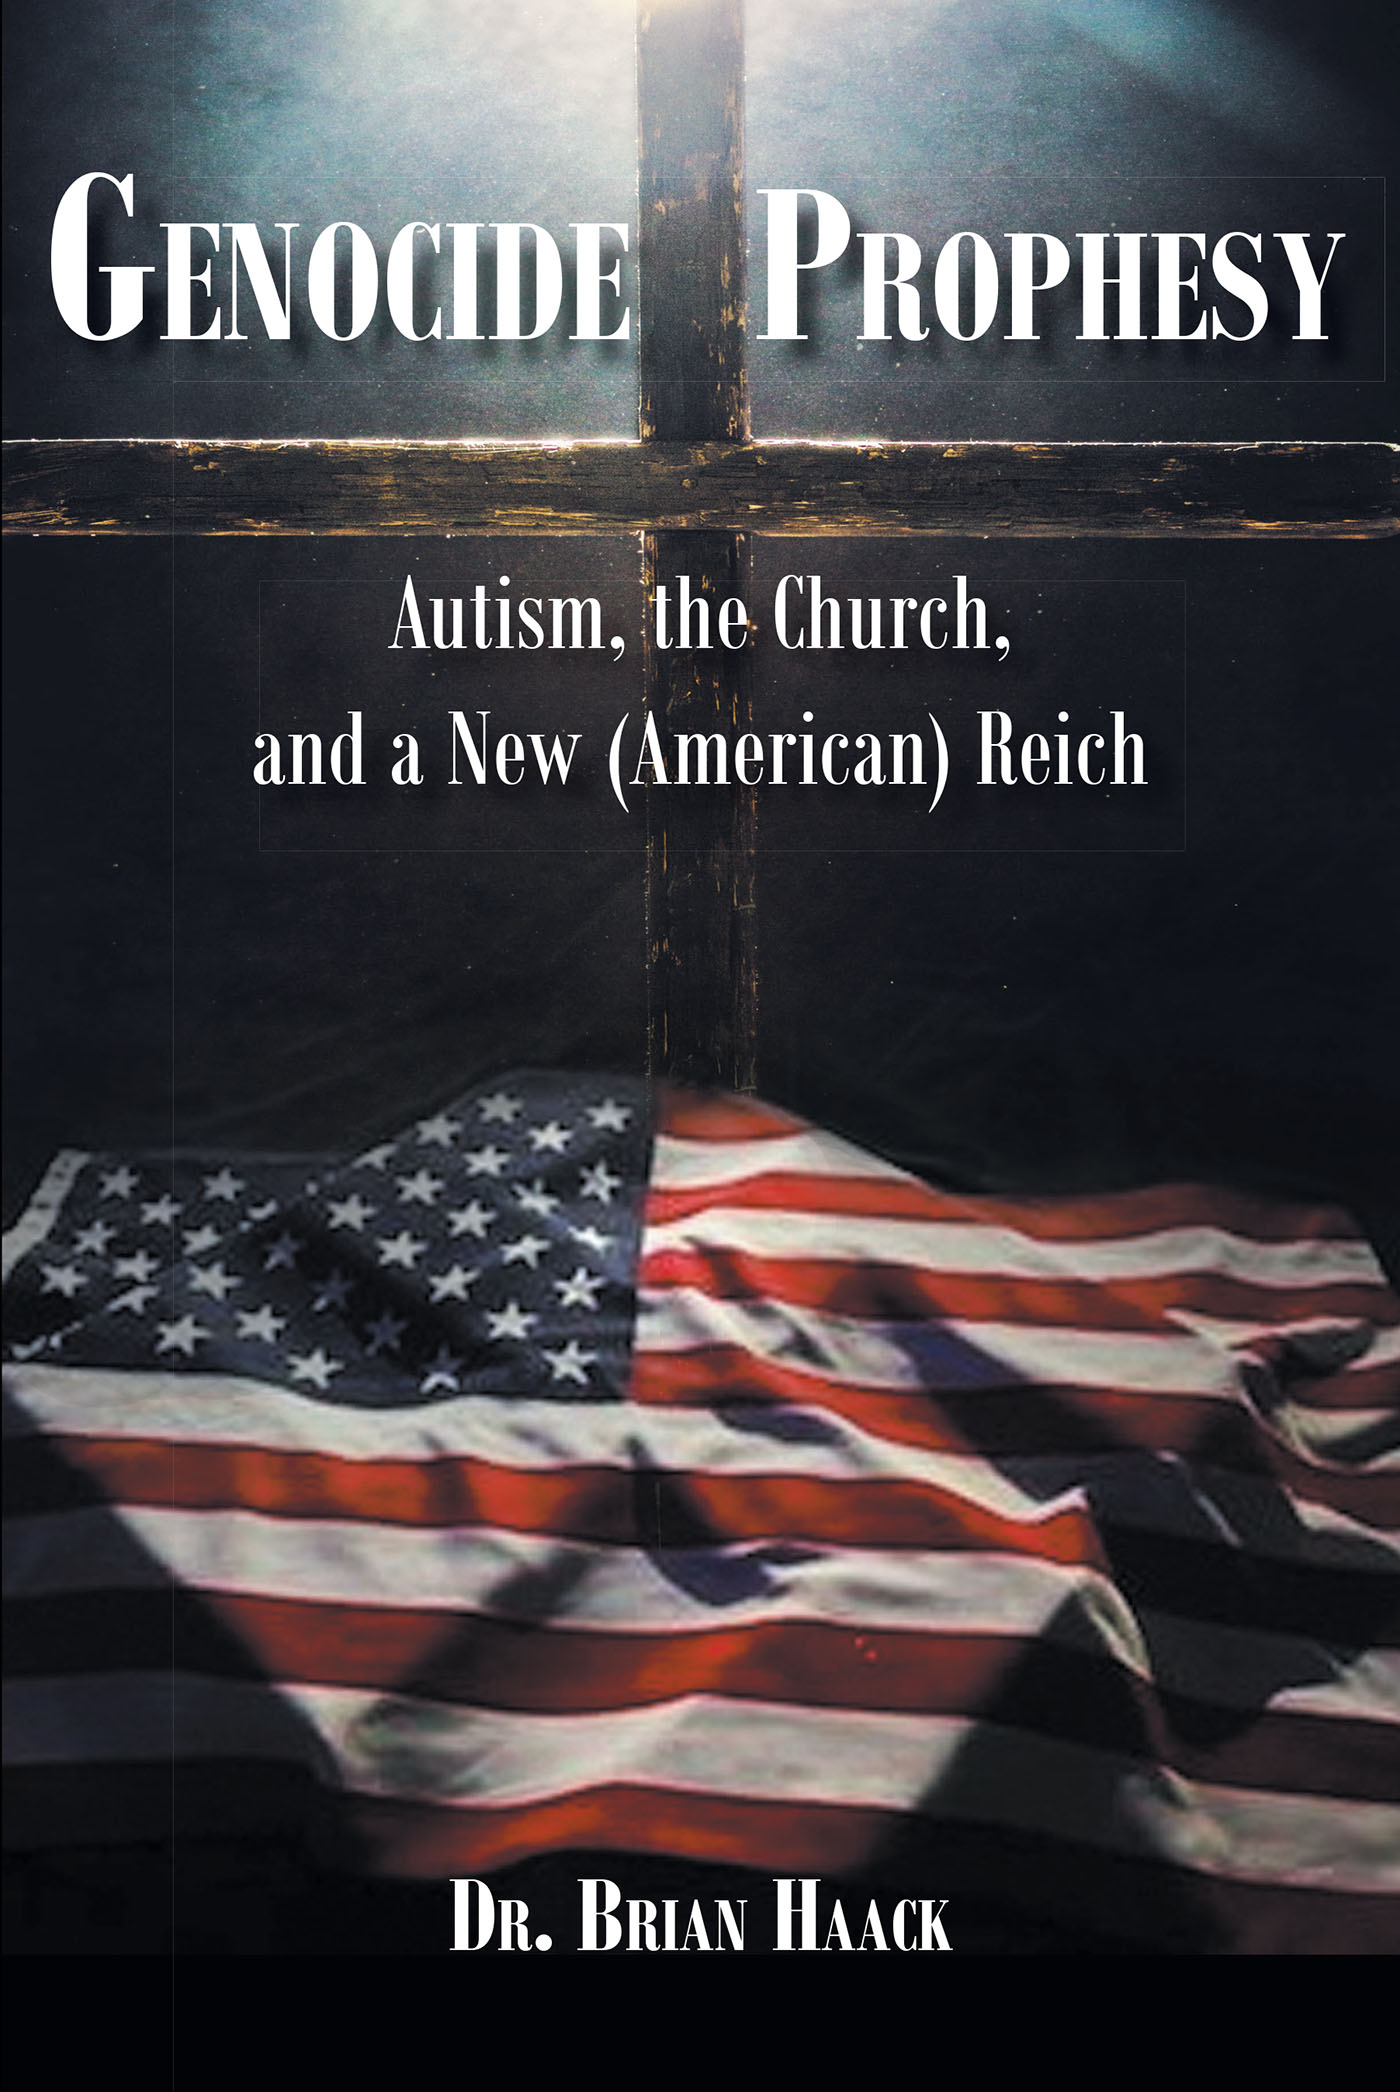 Dr. Brian Haack’s Newly Released "Genocide Prophesy: Autism, the Church and a New (American) Reich" is a Thought-Provoking Discussion of Political Trajectories